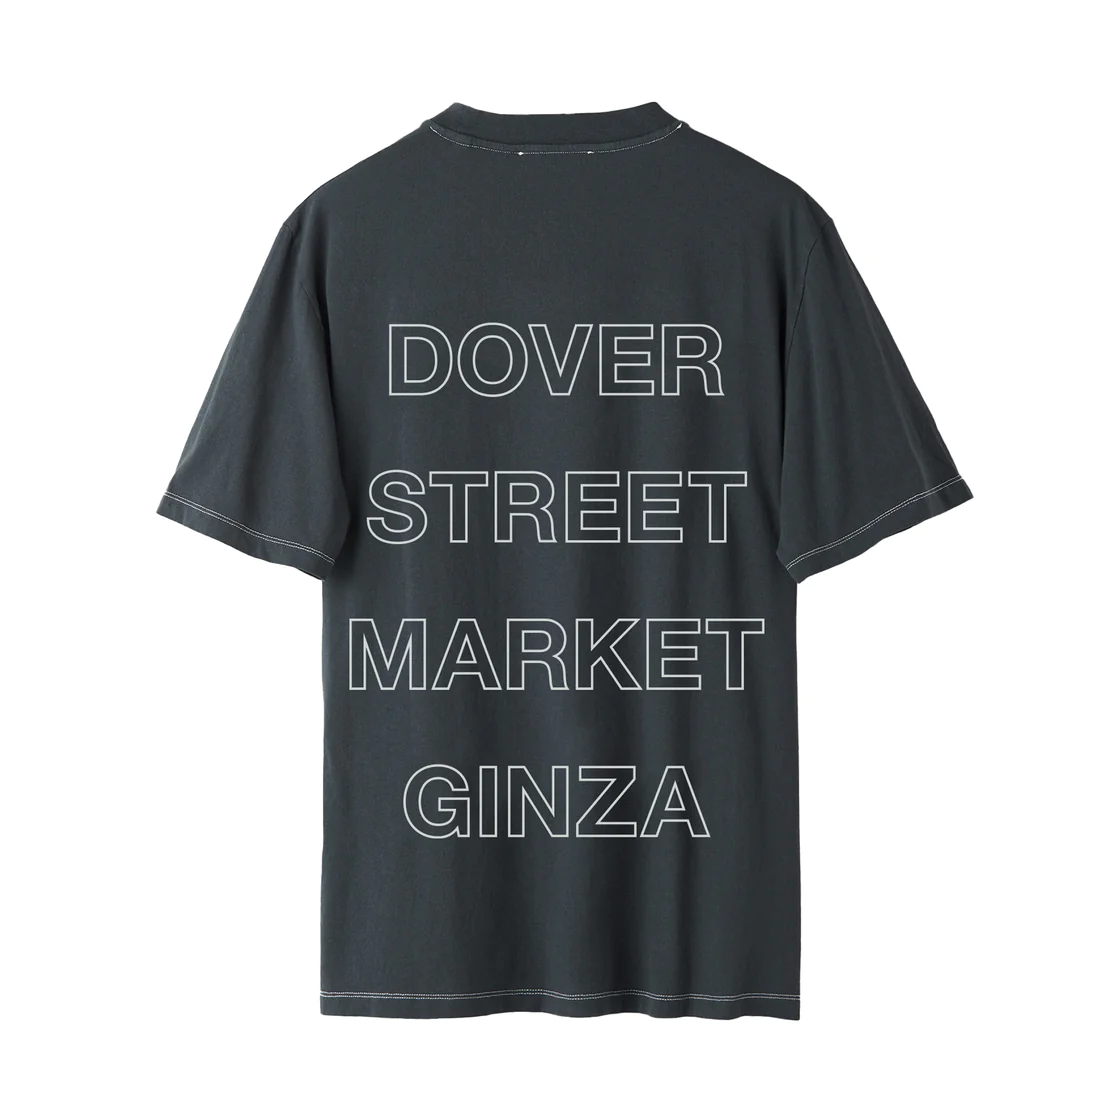 Our Legacy Workshop DSM Exclusives (アワーレガシー ドーバーストリートマーケット DOVER STREET MARKET)